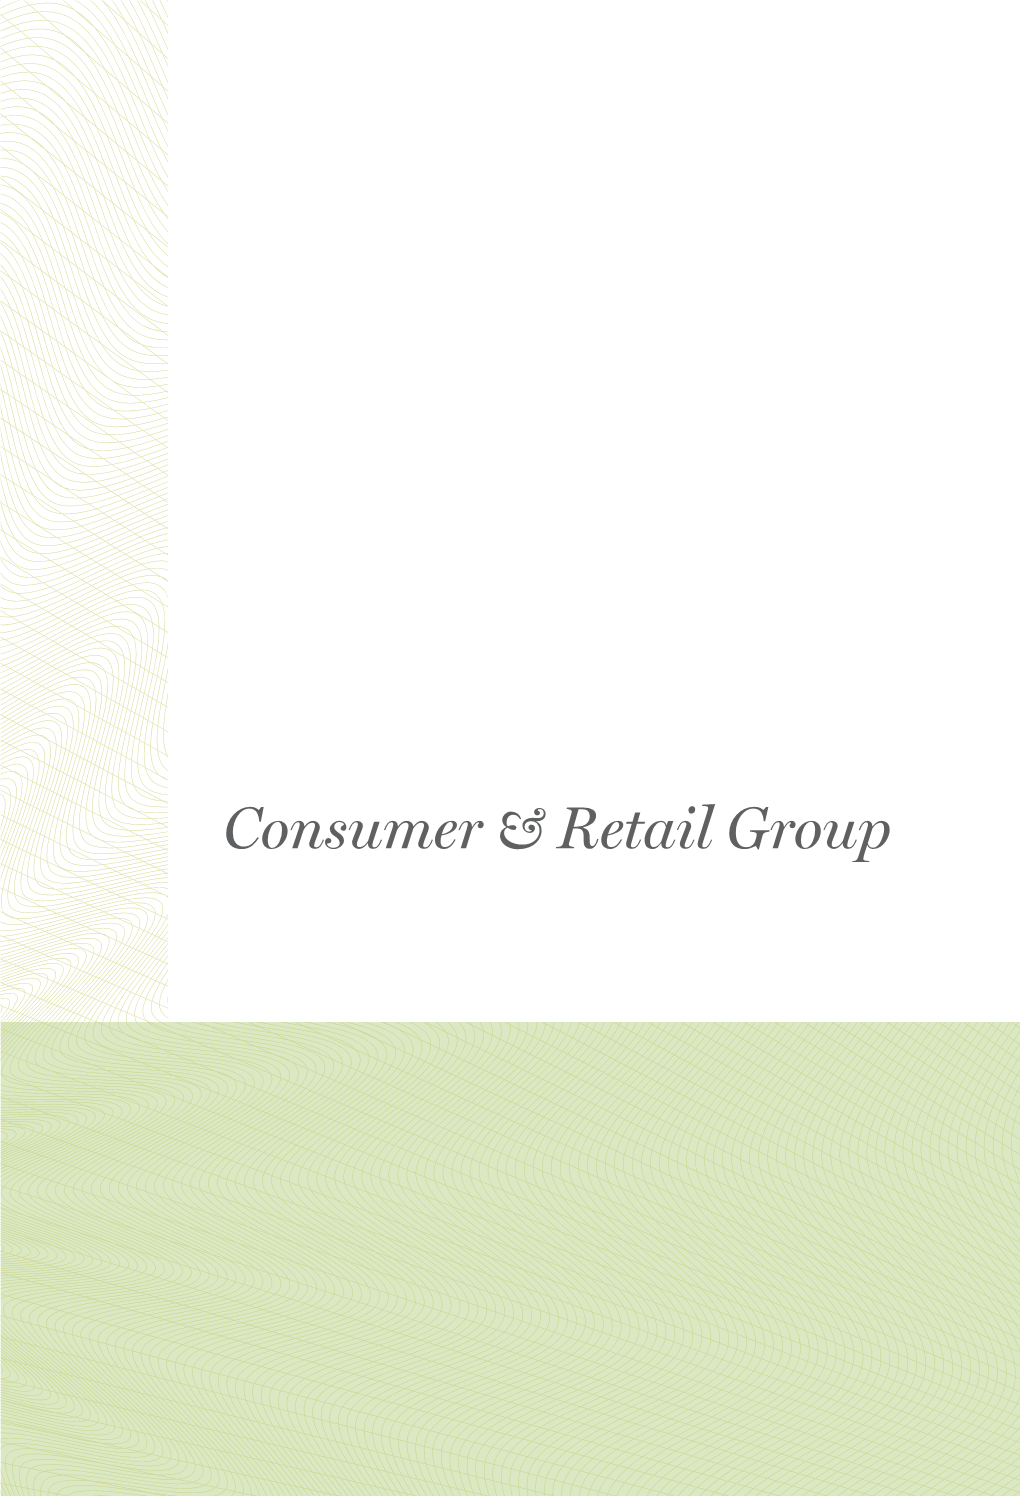 Consumer & Retail Group